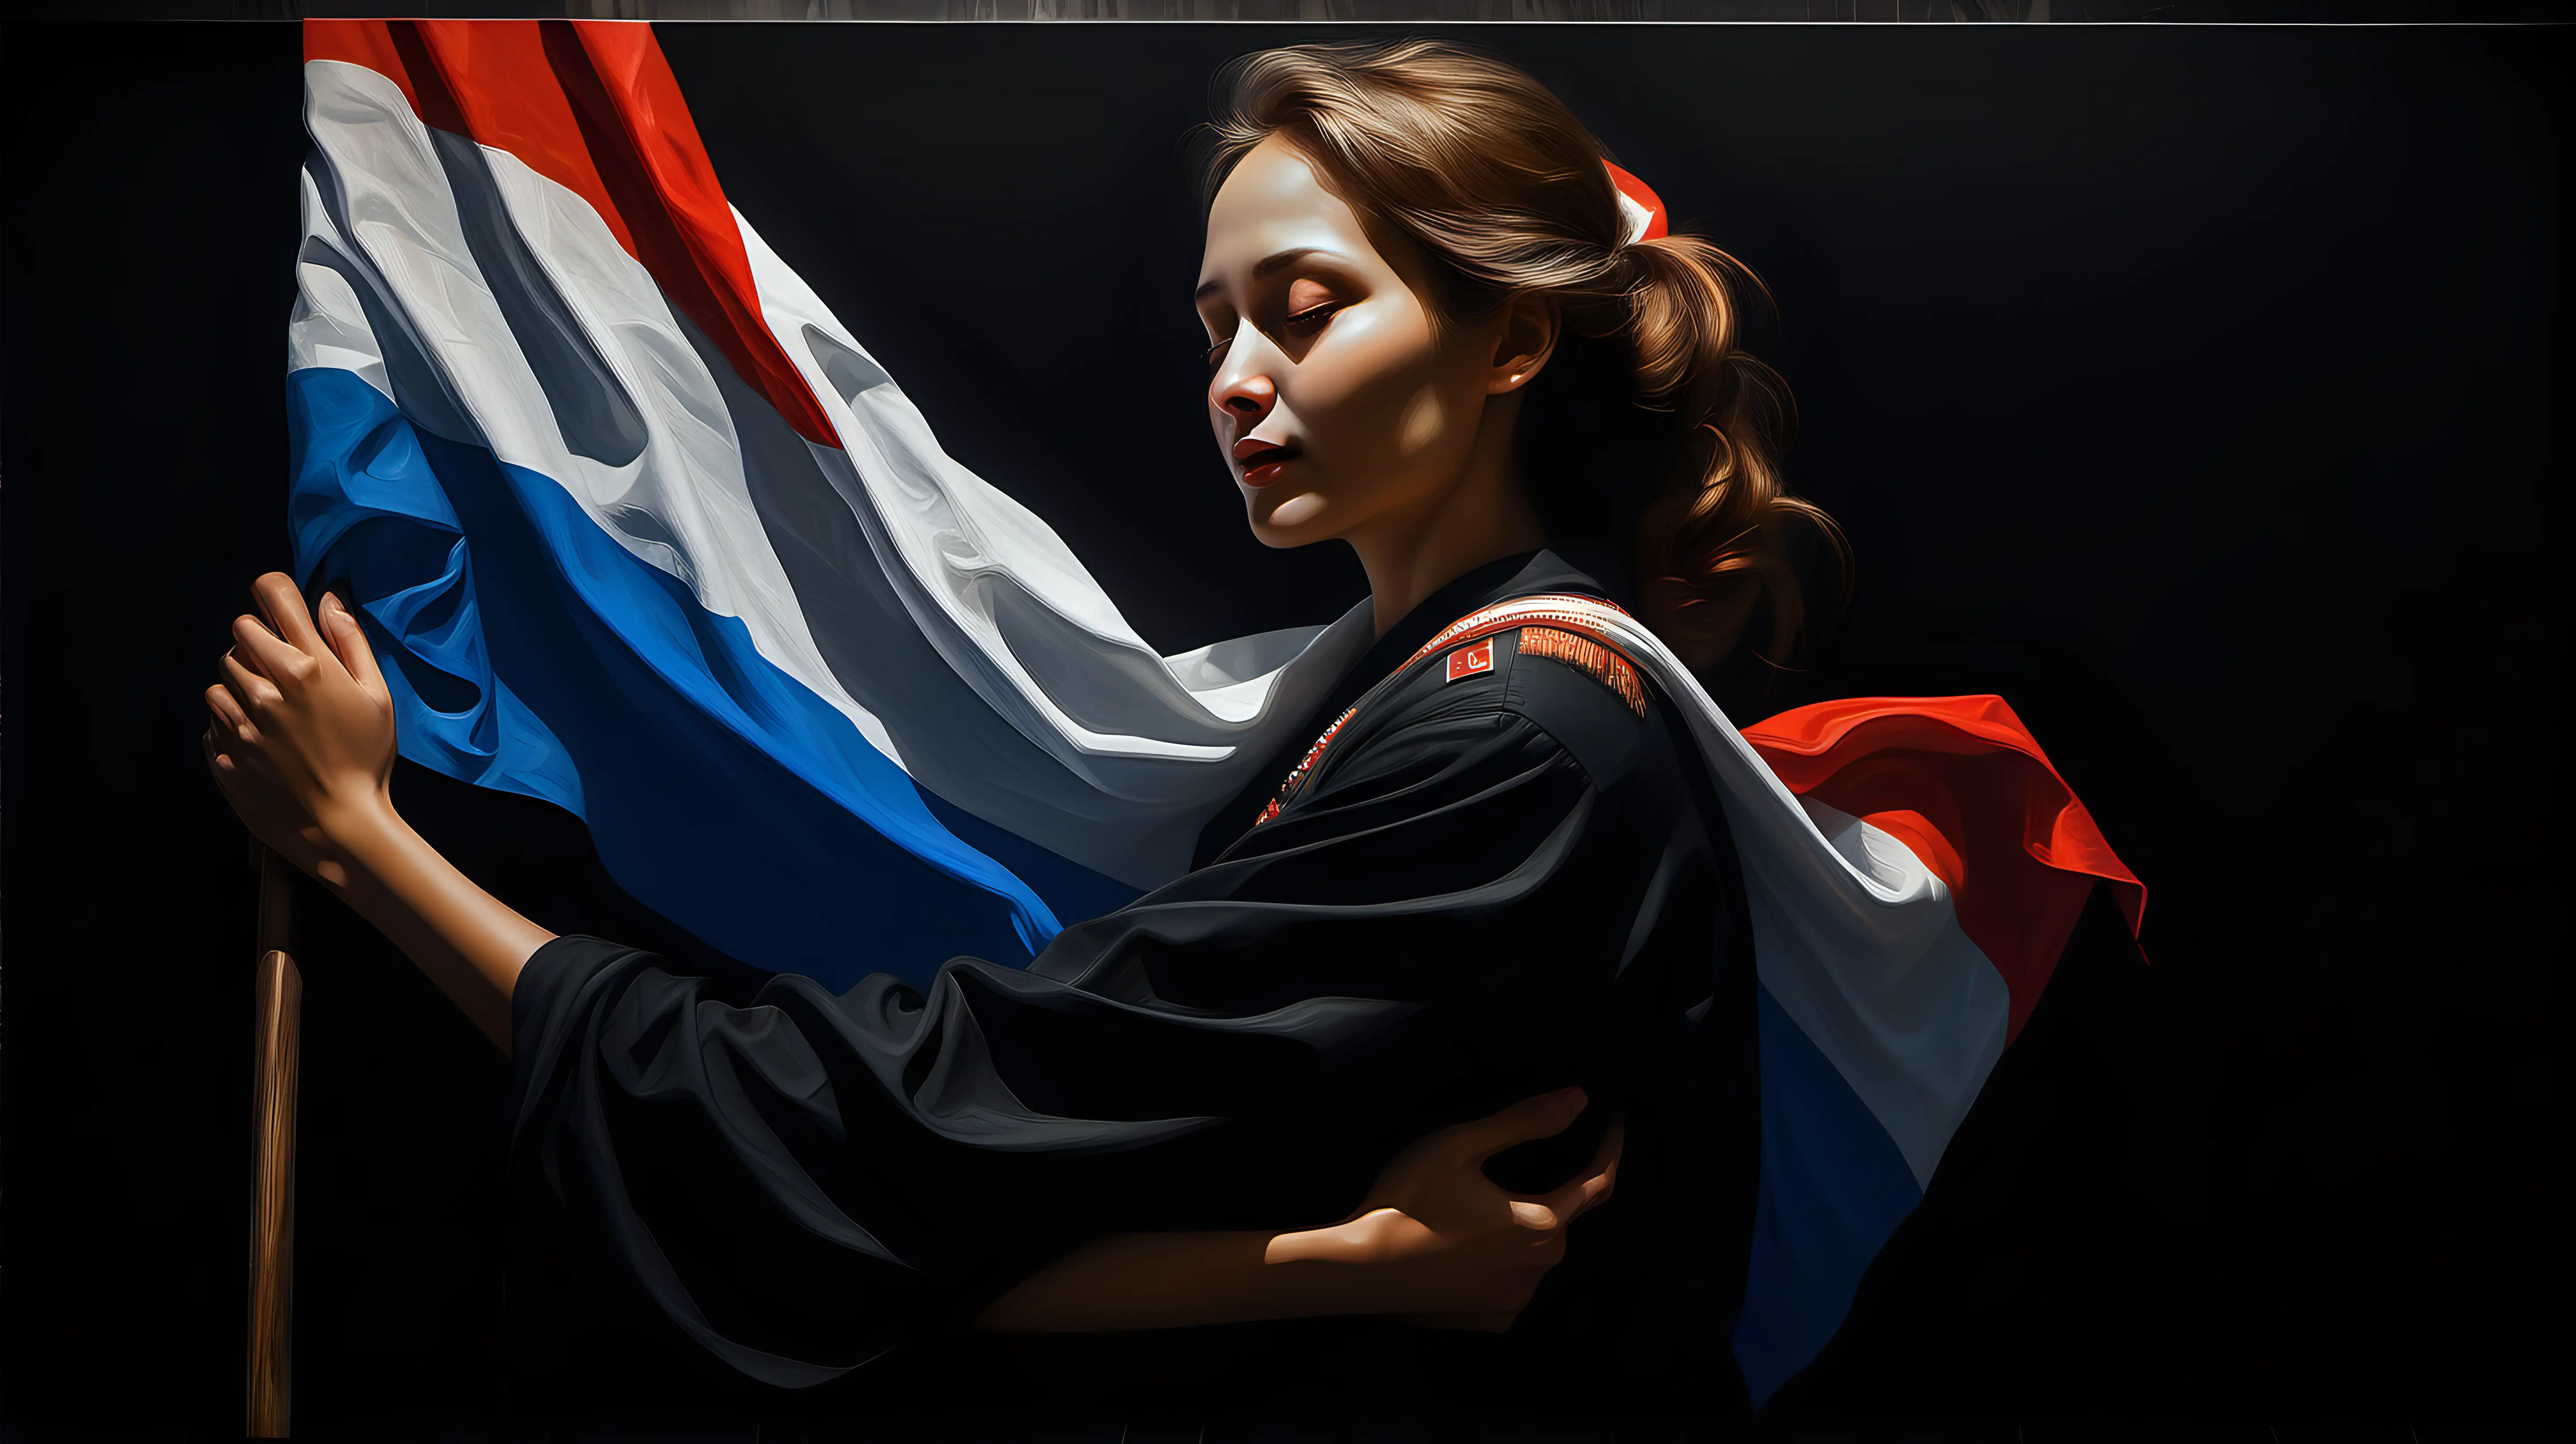 Convey a powerful message of love for the motherland by depicting a person tenderly cradling a luminous Russian flag against a deep black canvas.